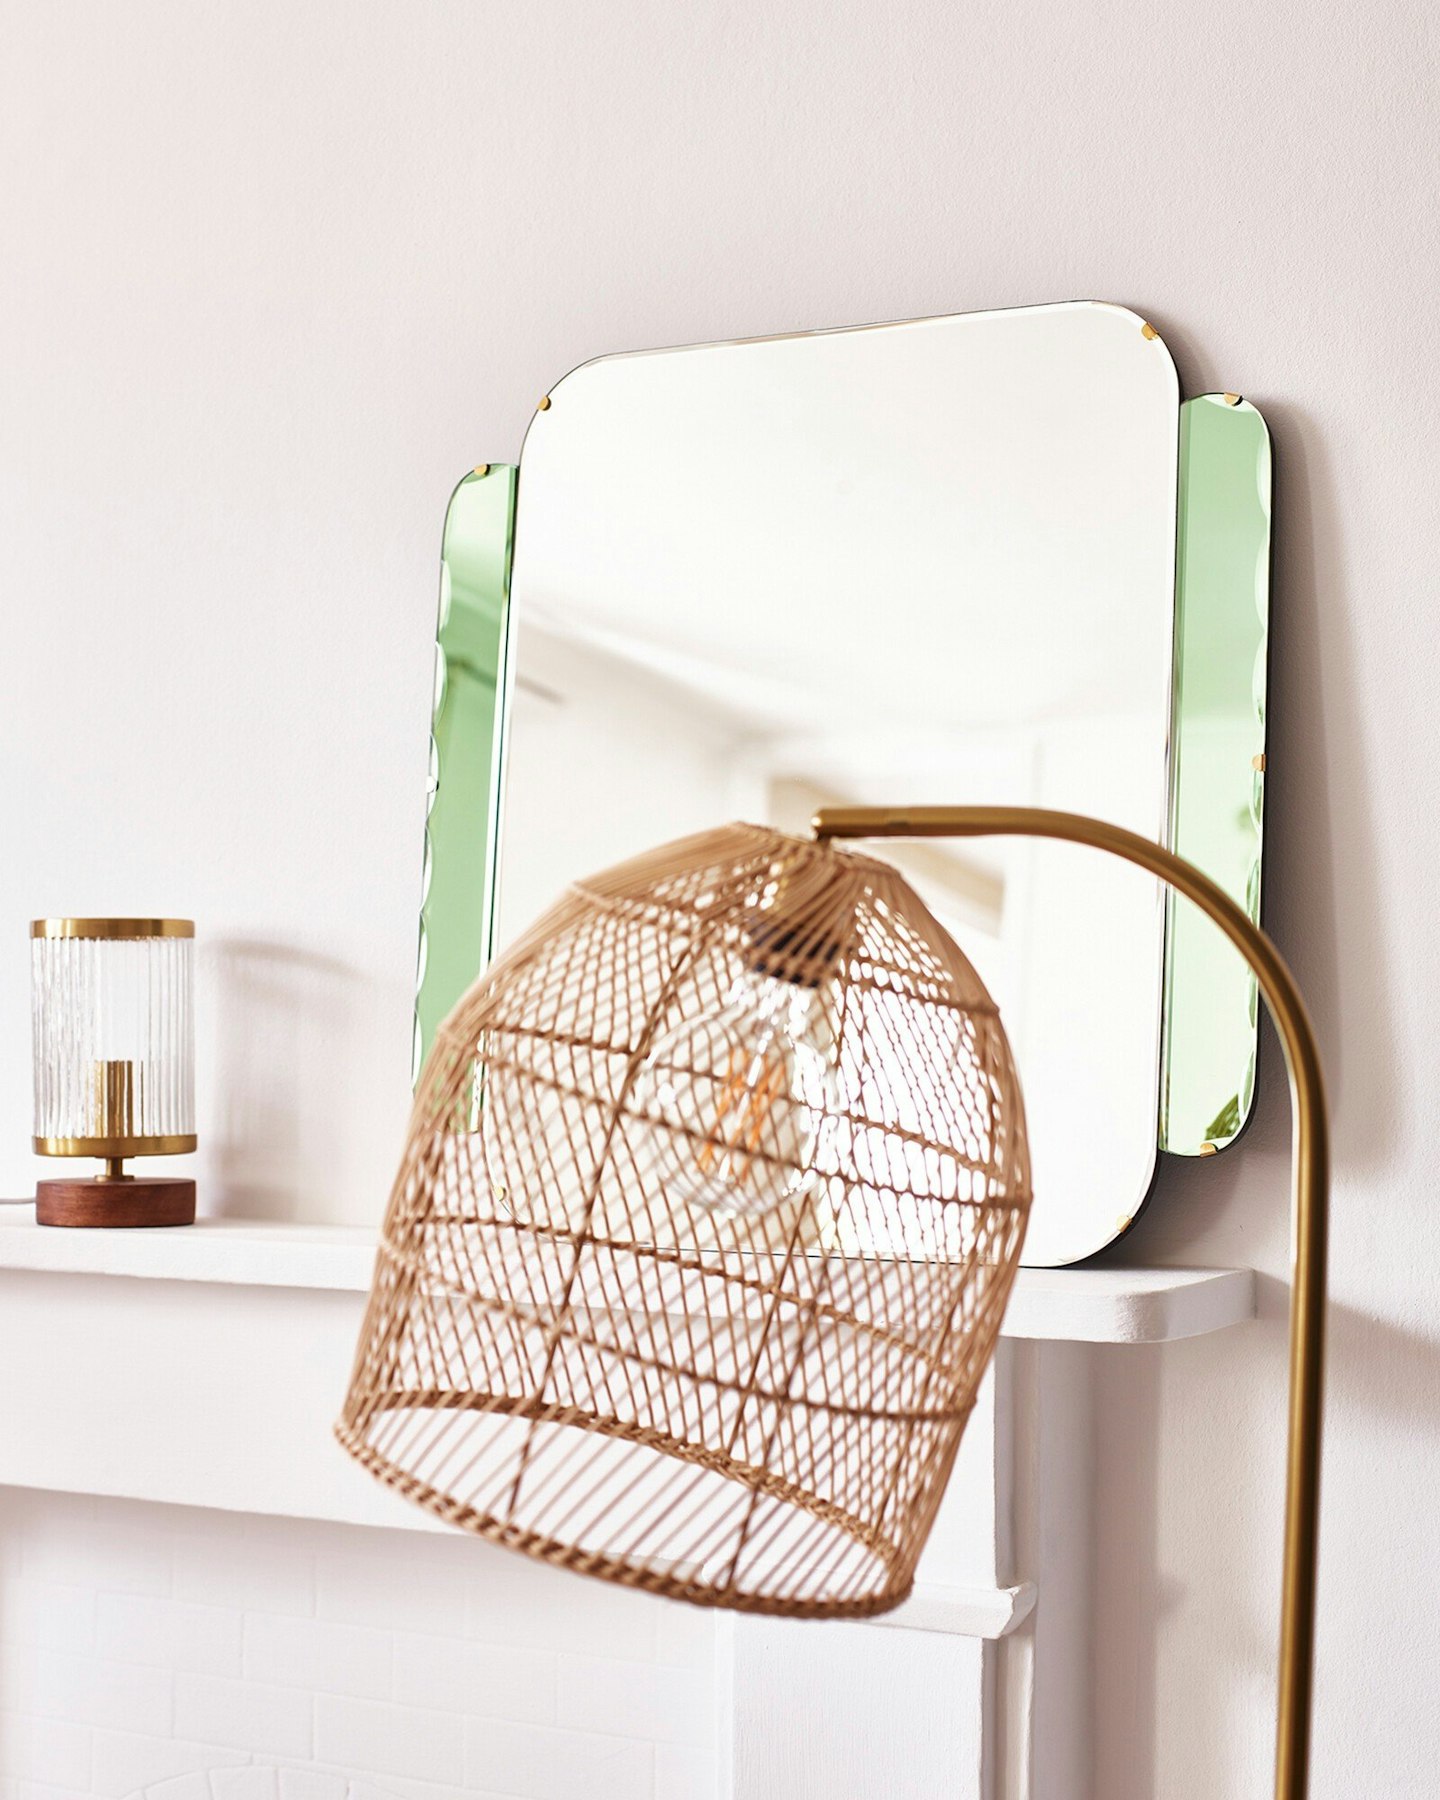 Oliver Bonas, Clement Green Glass Square Wall Mirror, £125